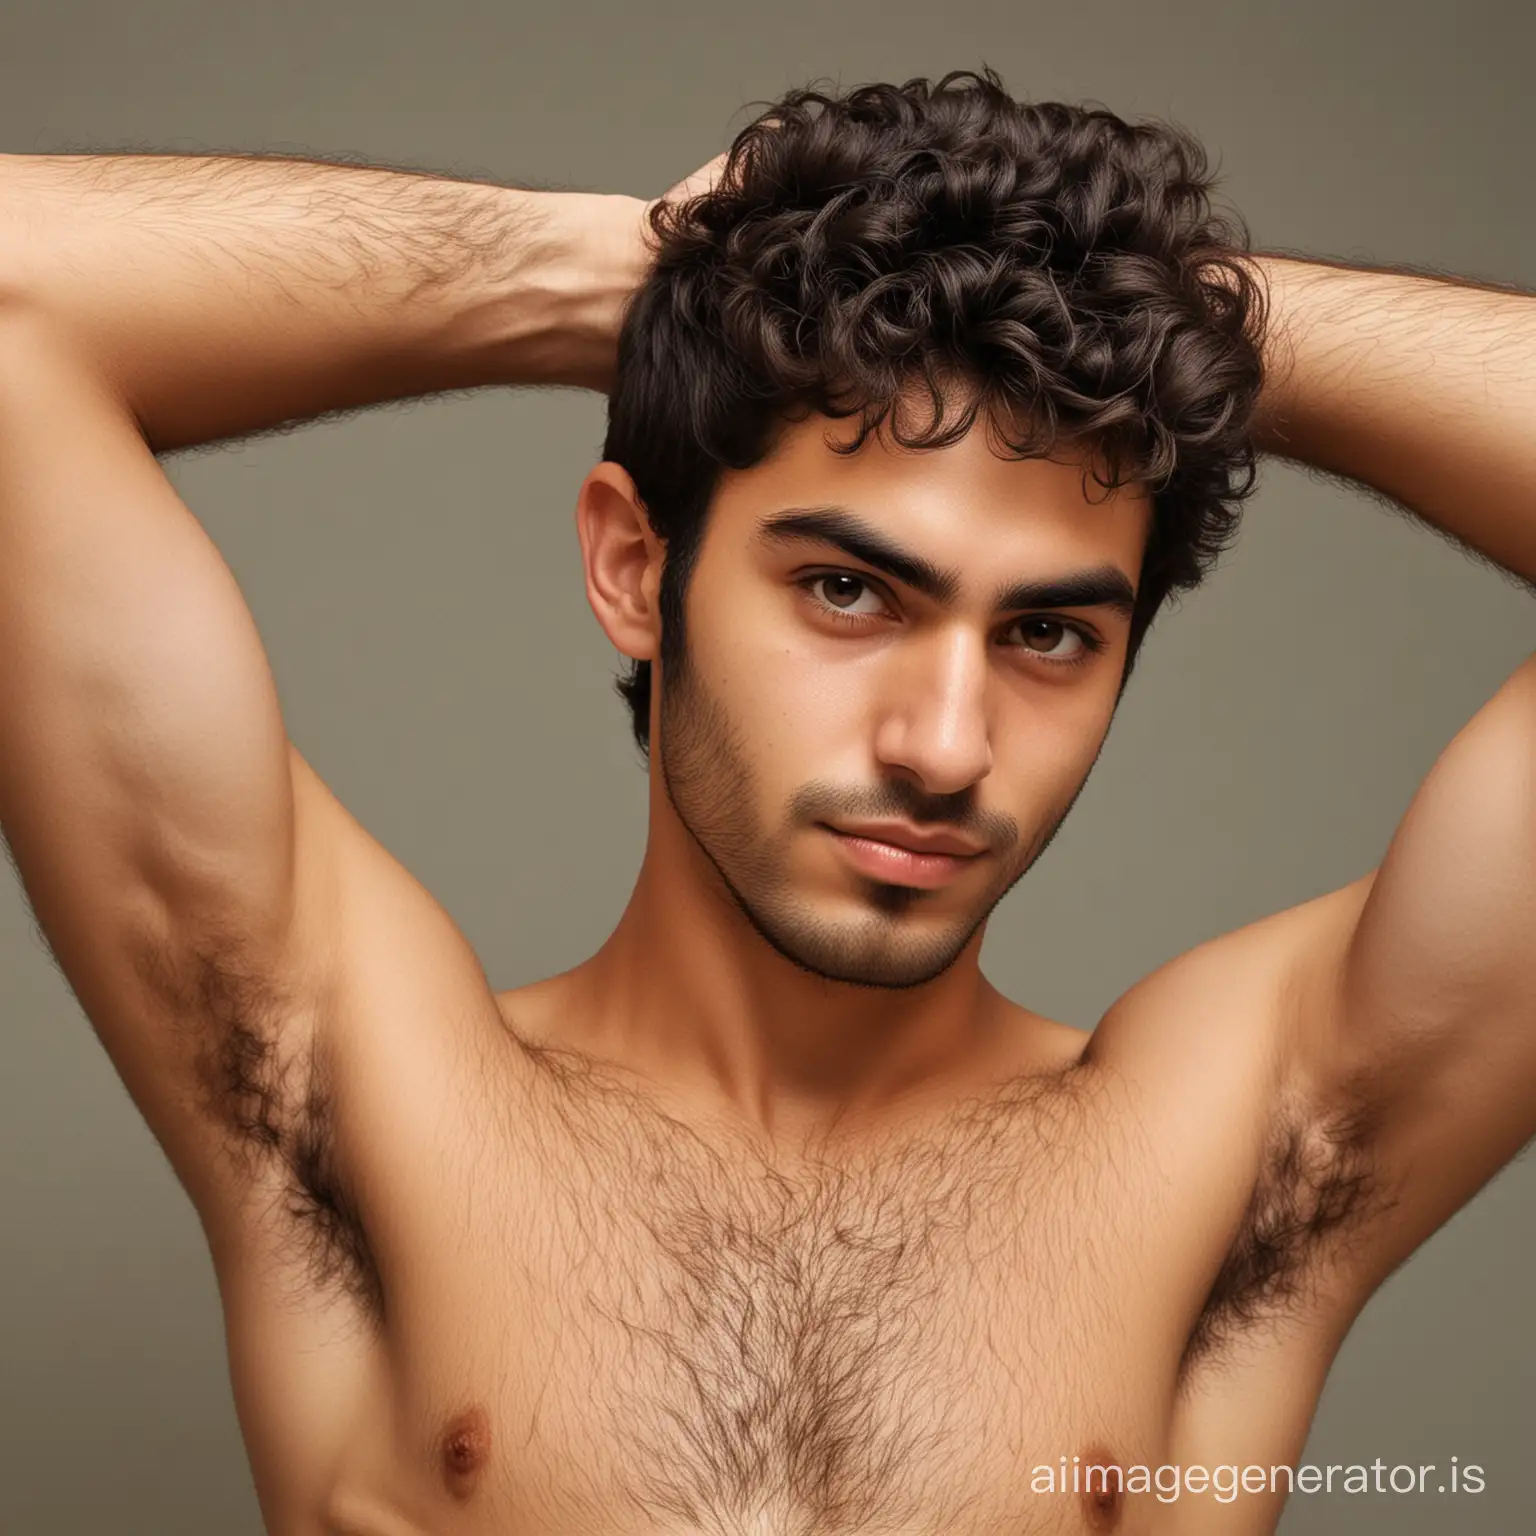 Young-Iranian-Man-with-Natural-Features